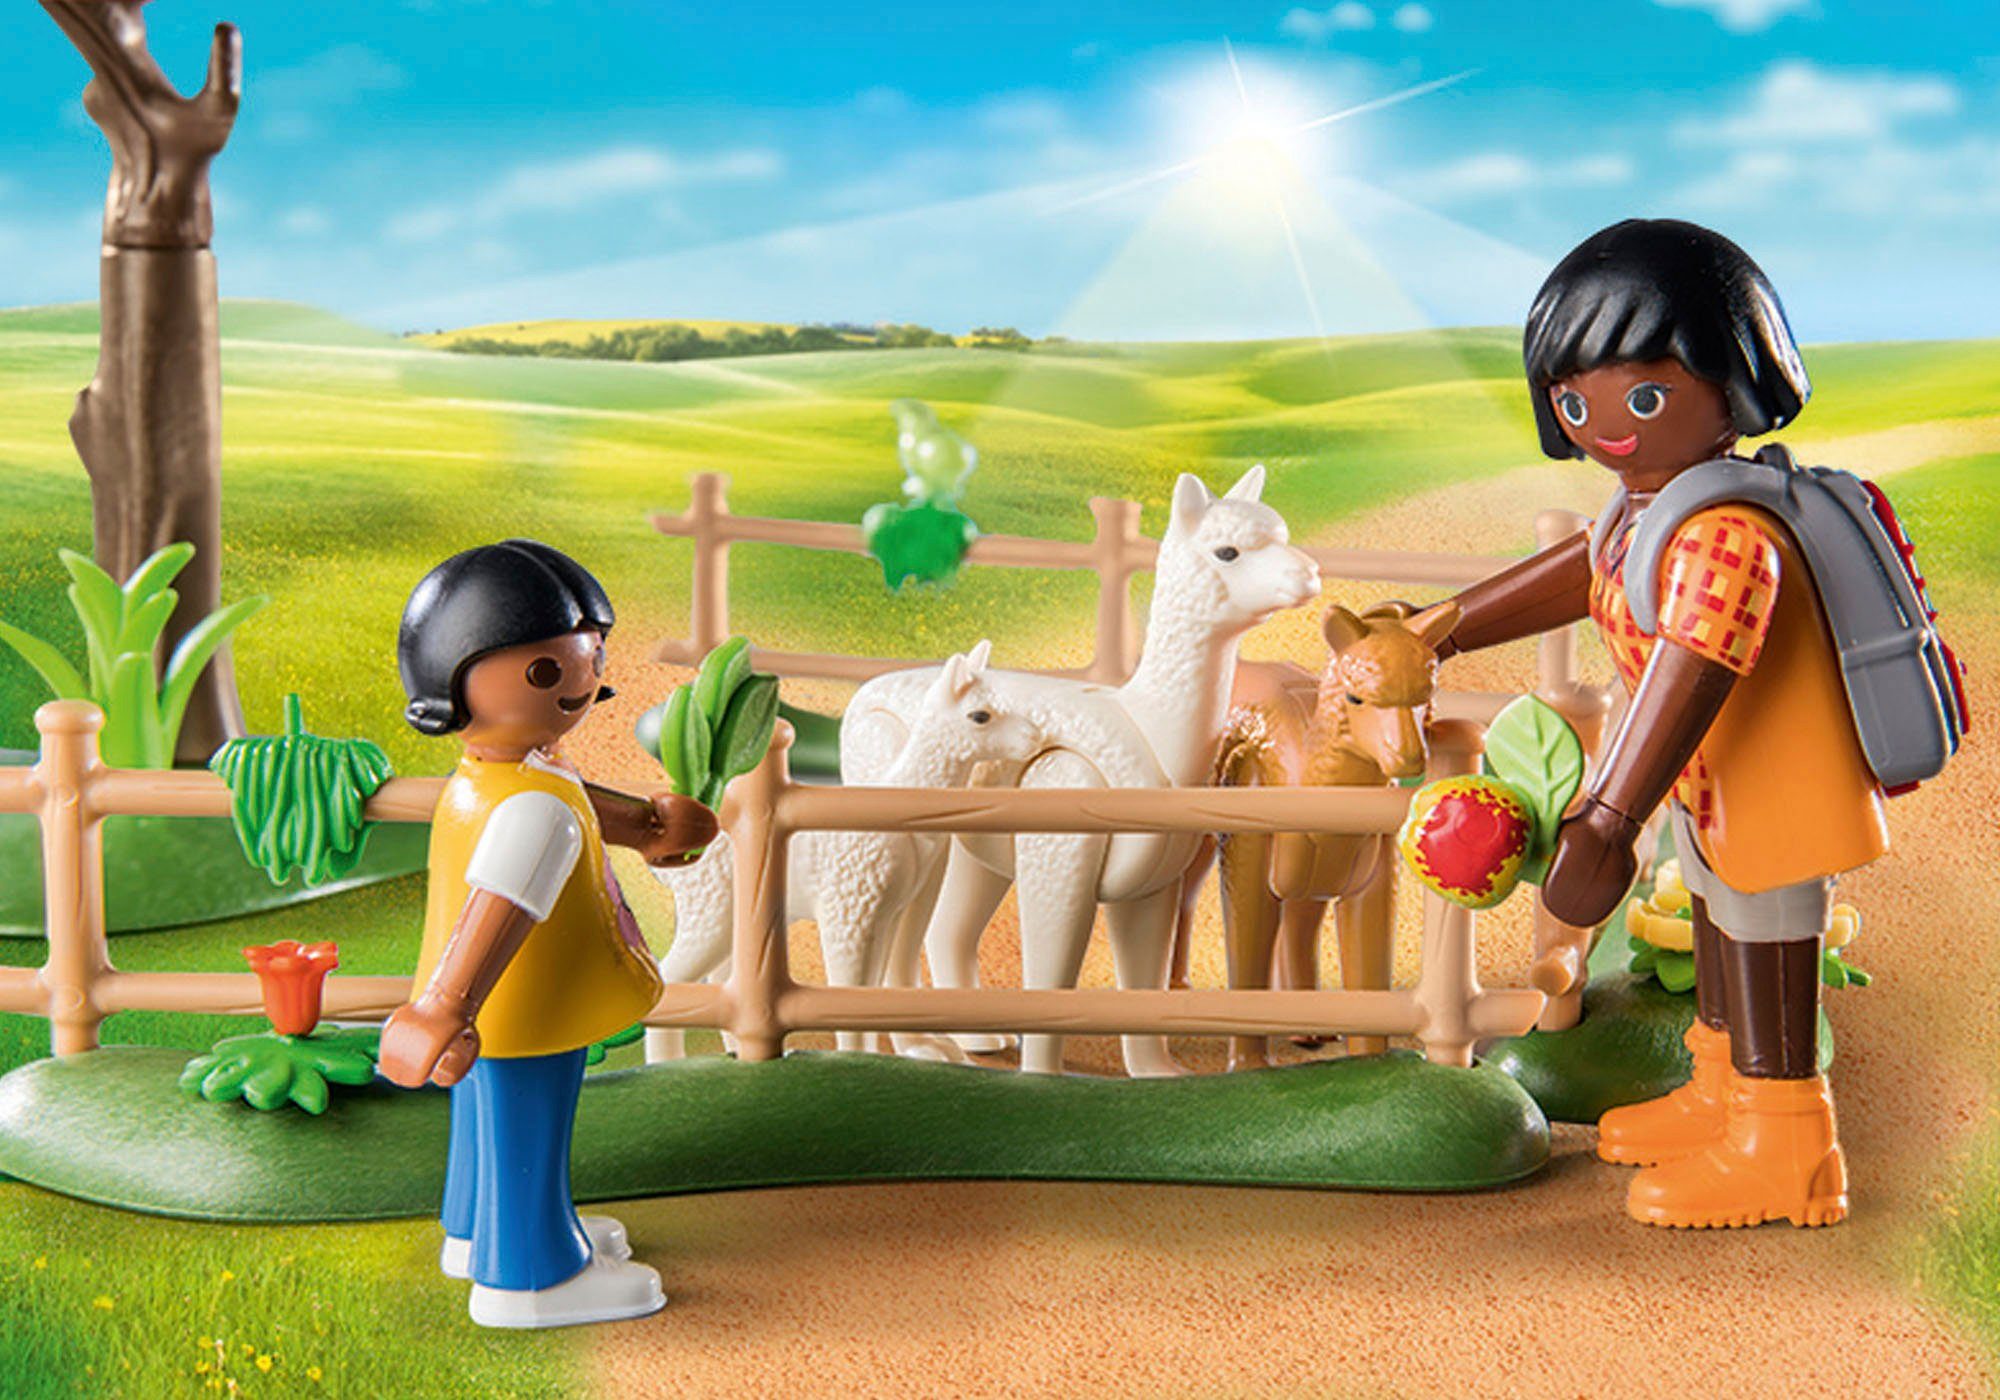 Konstruktions-Spielset aus Country, teilweise Alpaka-Wanderung (71251), recyceltem in Europe Made Playmobil® Material;